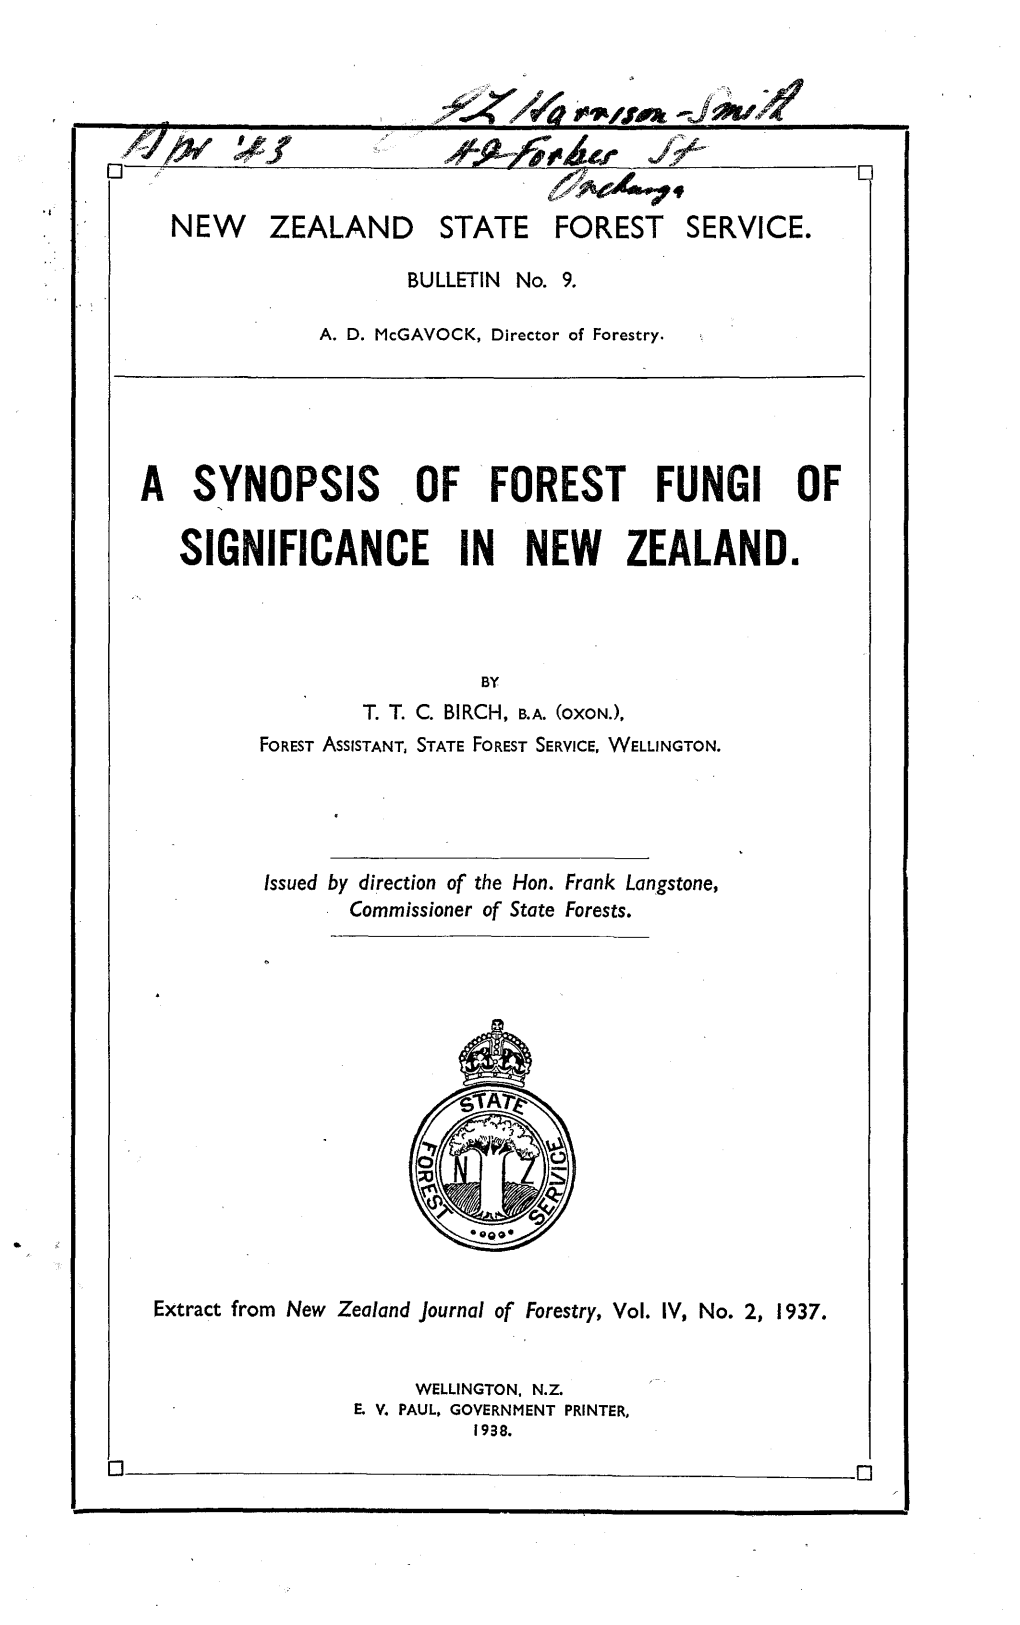 A Synopsis of Forest Fungi of Significance in New Zealand